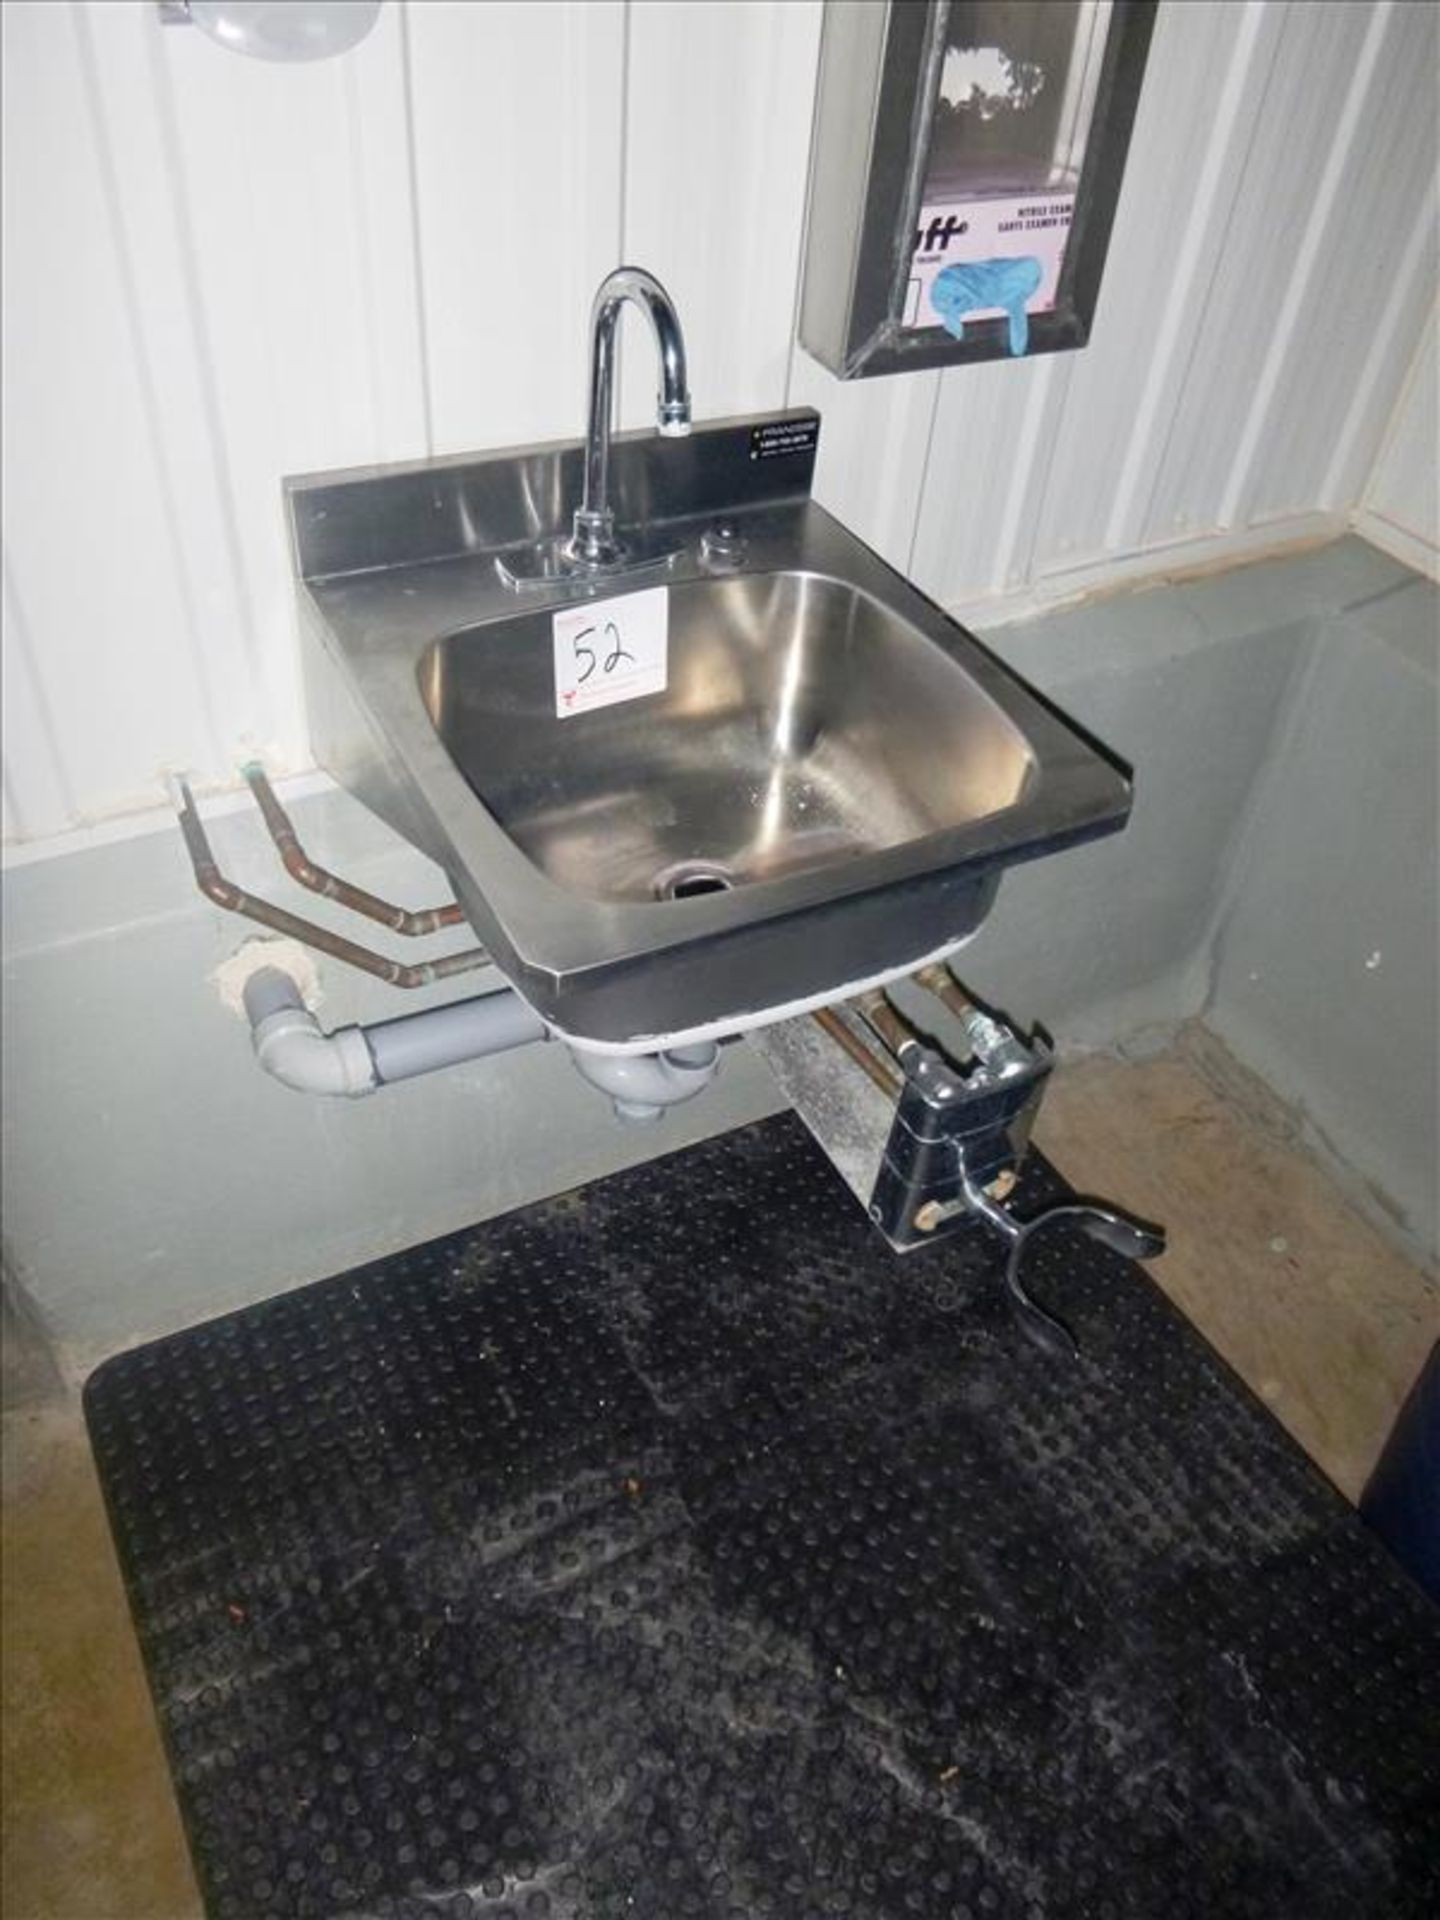 s/s hand wash sink, wall mounted, foot operated